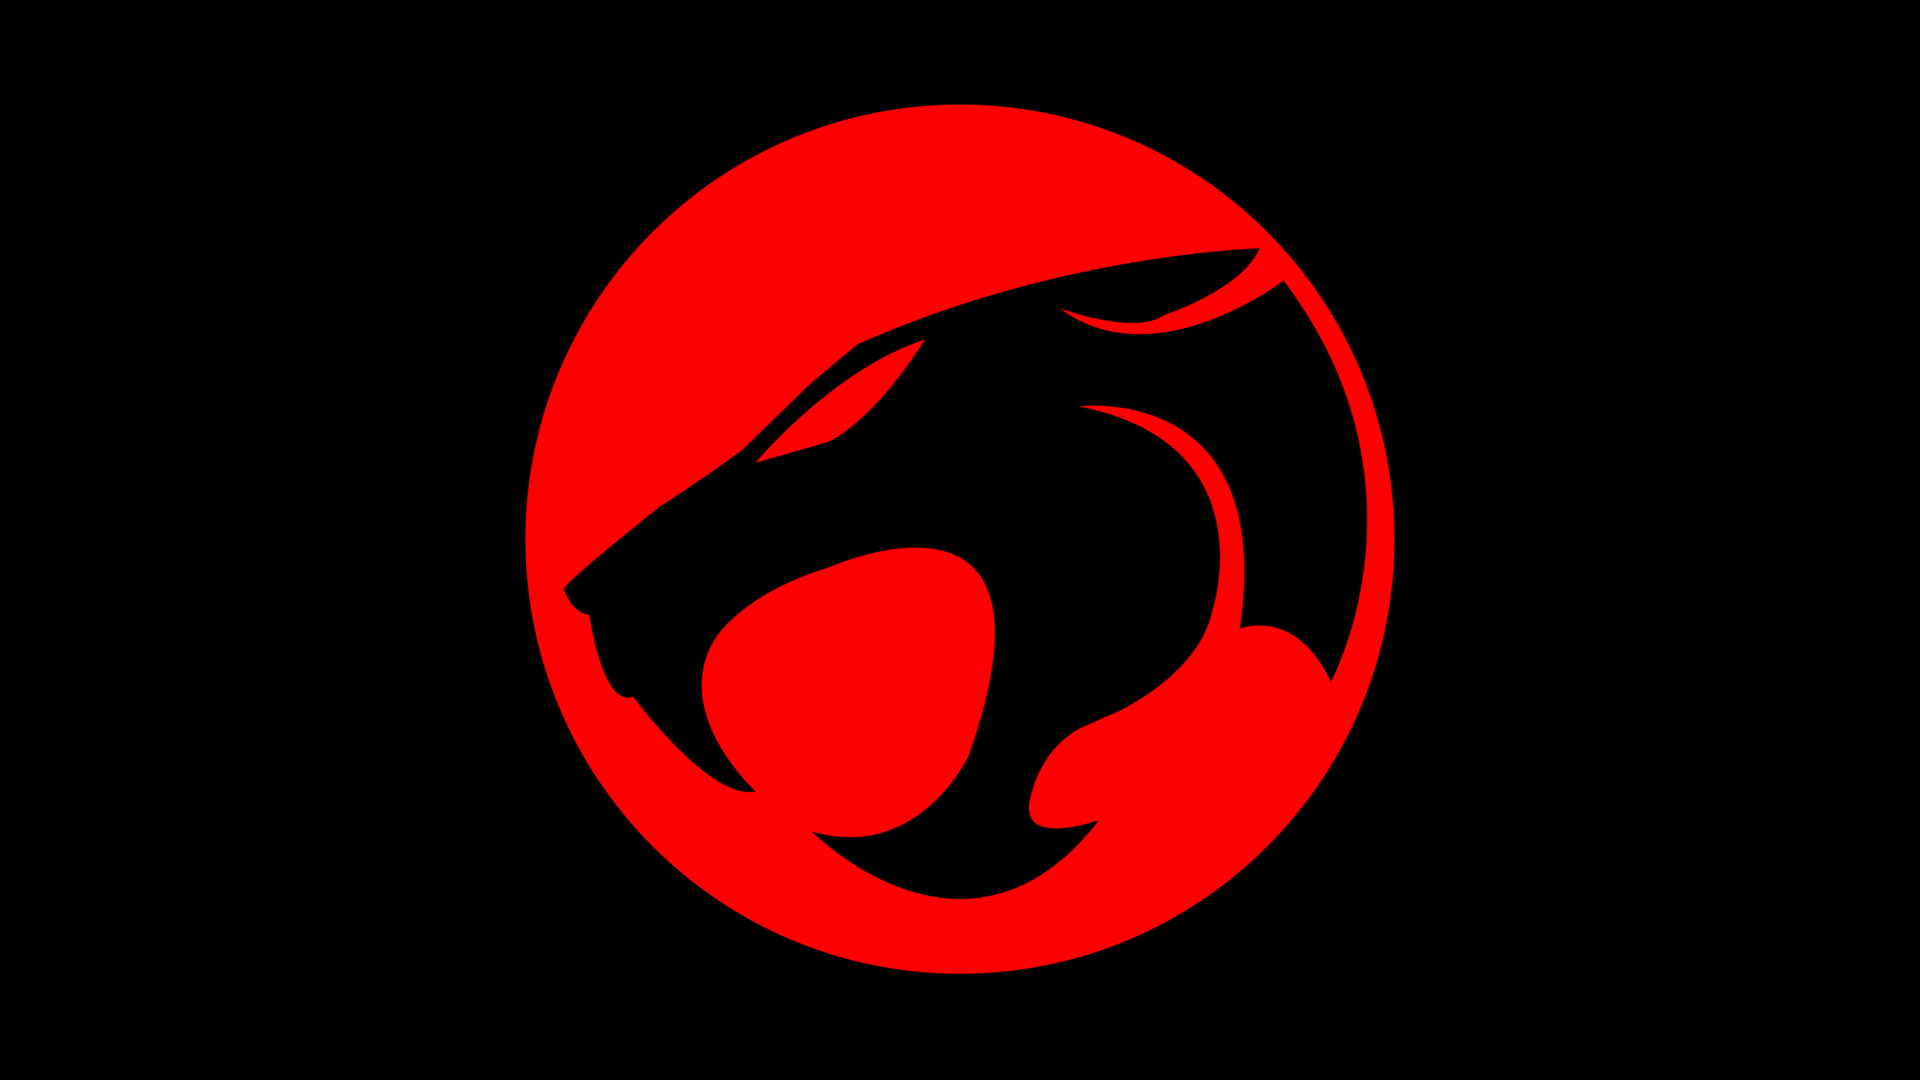 General 1920x1080 ThunderCats logo simple background black red black background